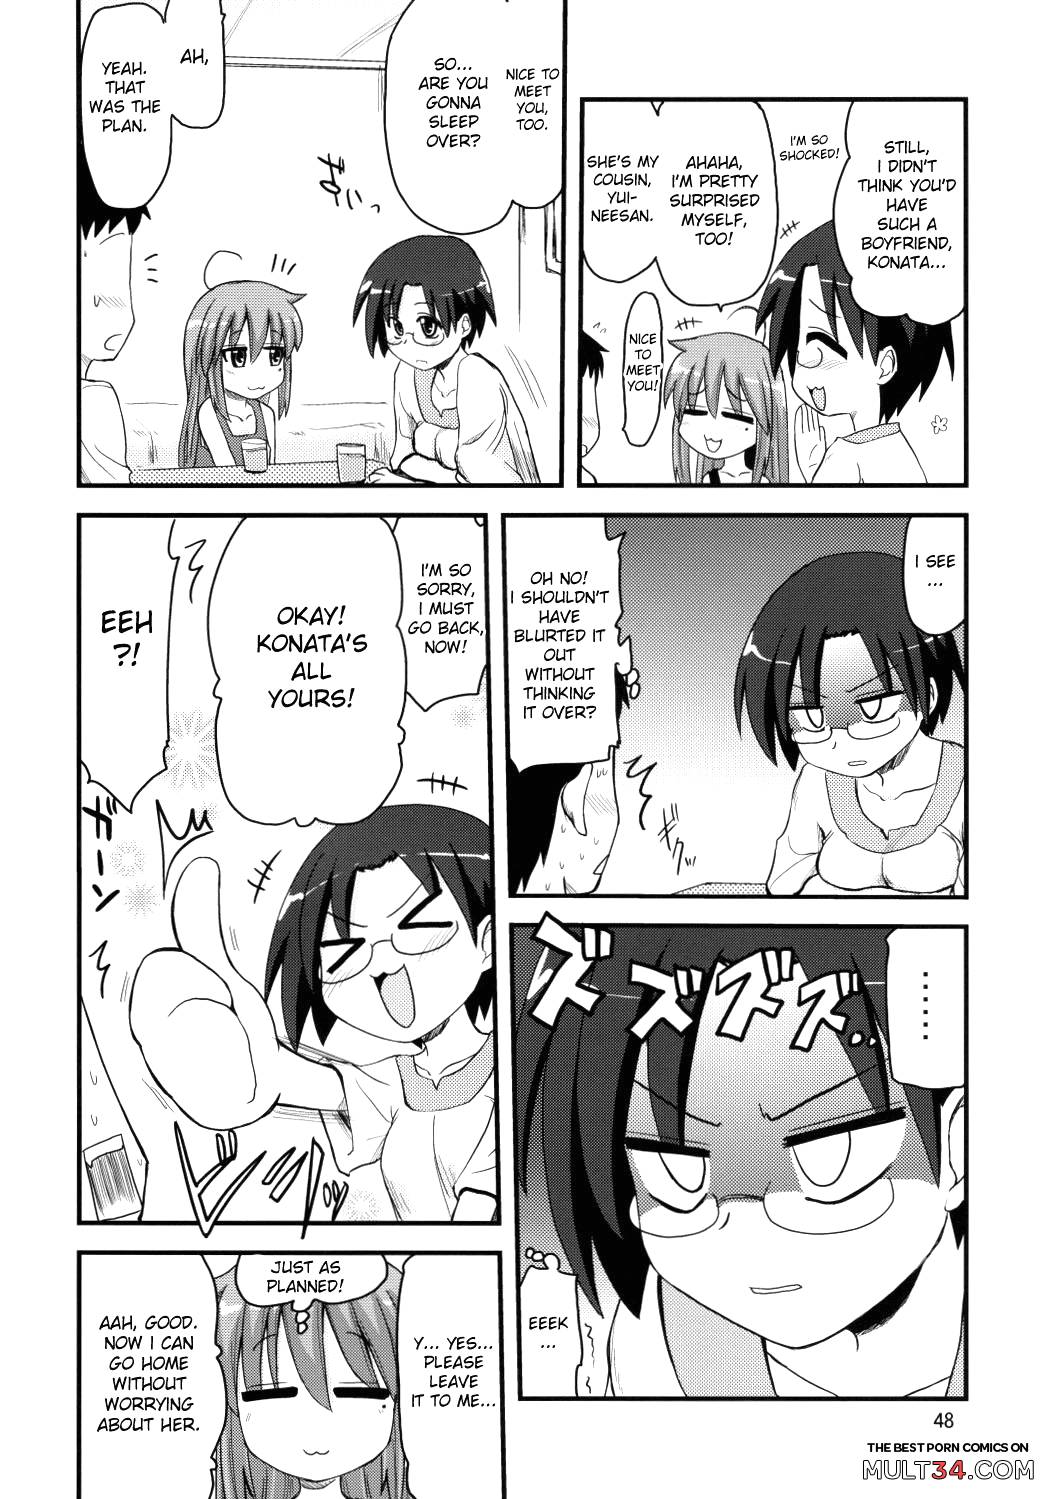 Konata and Oh-zu 4 people each and every one + 1 page 44